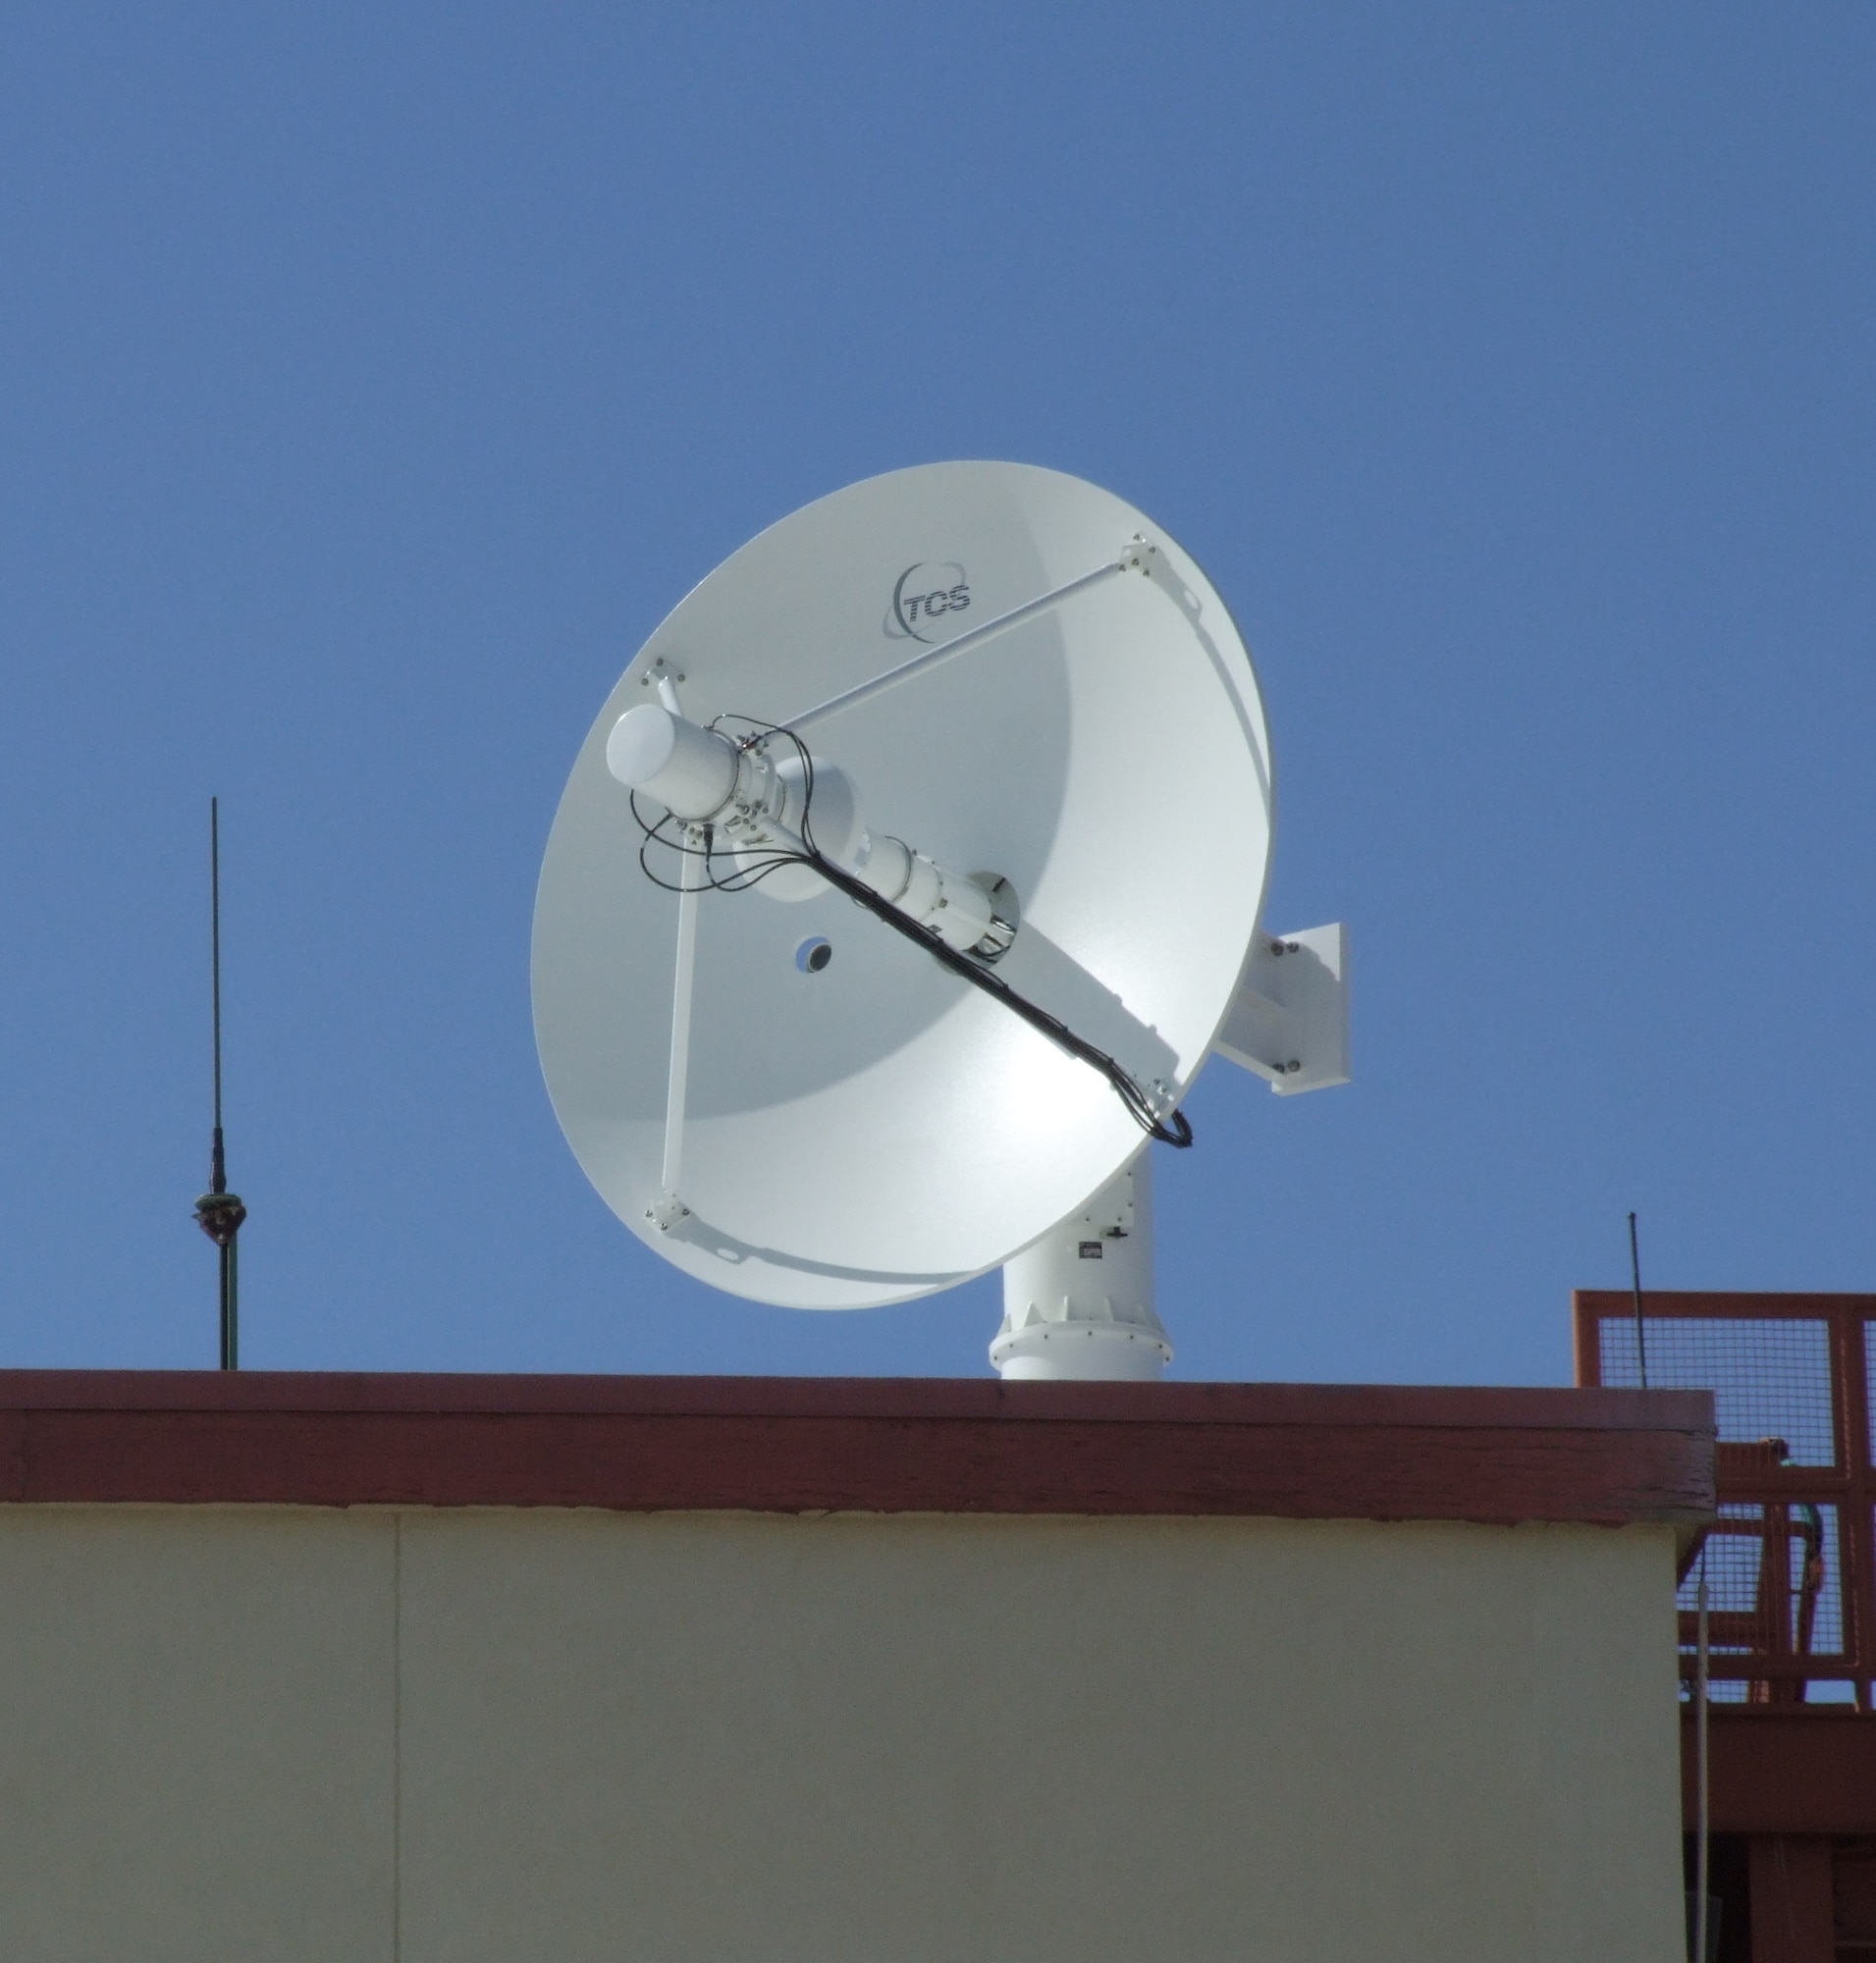 A newly installed antenna sits atop the U.S. Air Force Test Pilot School. The antenna is part of a new aeronautical telemetry ground system that will allow airborne data to be transferred to the ground in the C-band frequency range -- an adidtion to the L- and S-band frequency ranges currently used. The new tri-band system will increase bandwidth and allow more frequencies to be used by both the civilian community and Edwards Air Force Base. (Courtesy photo)